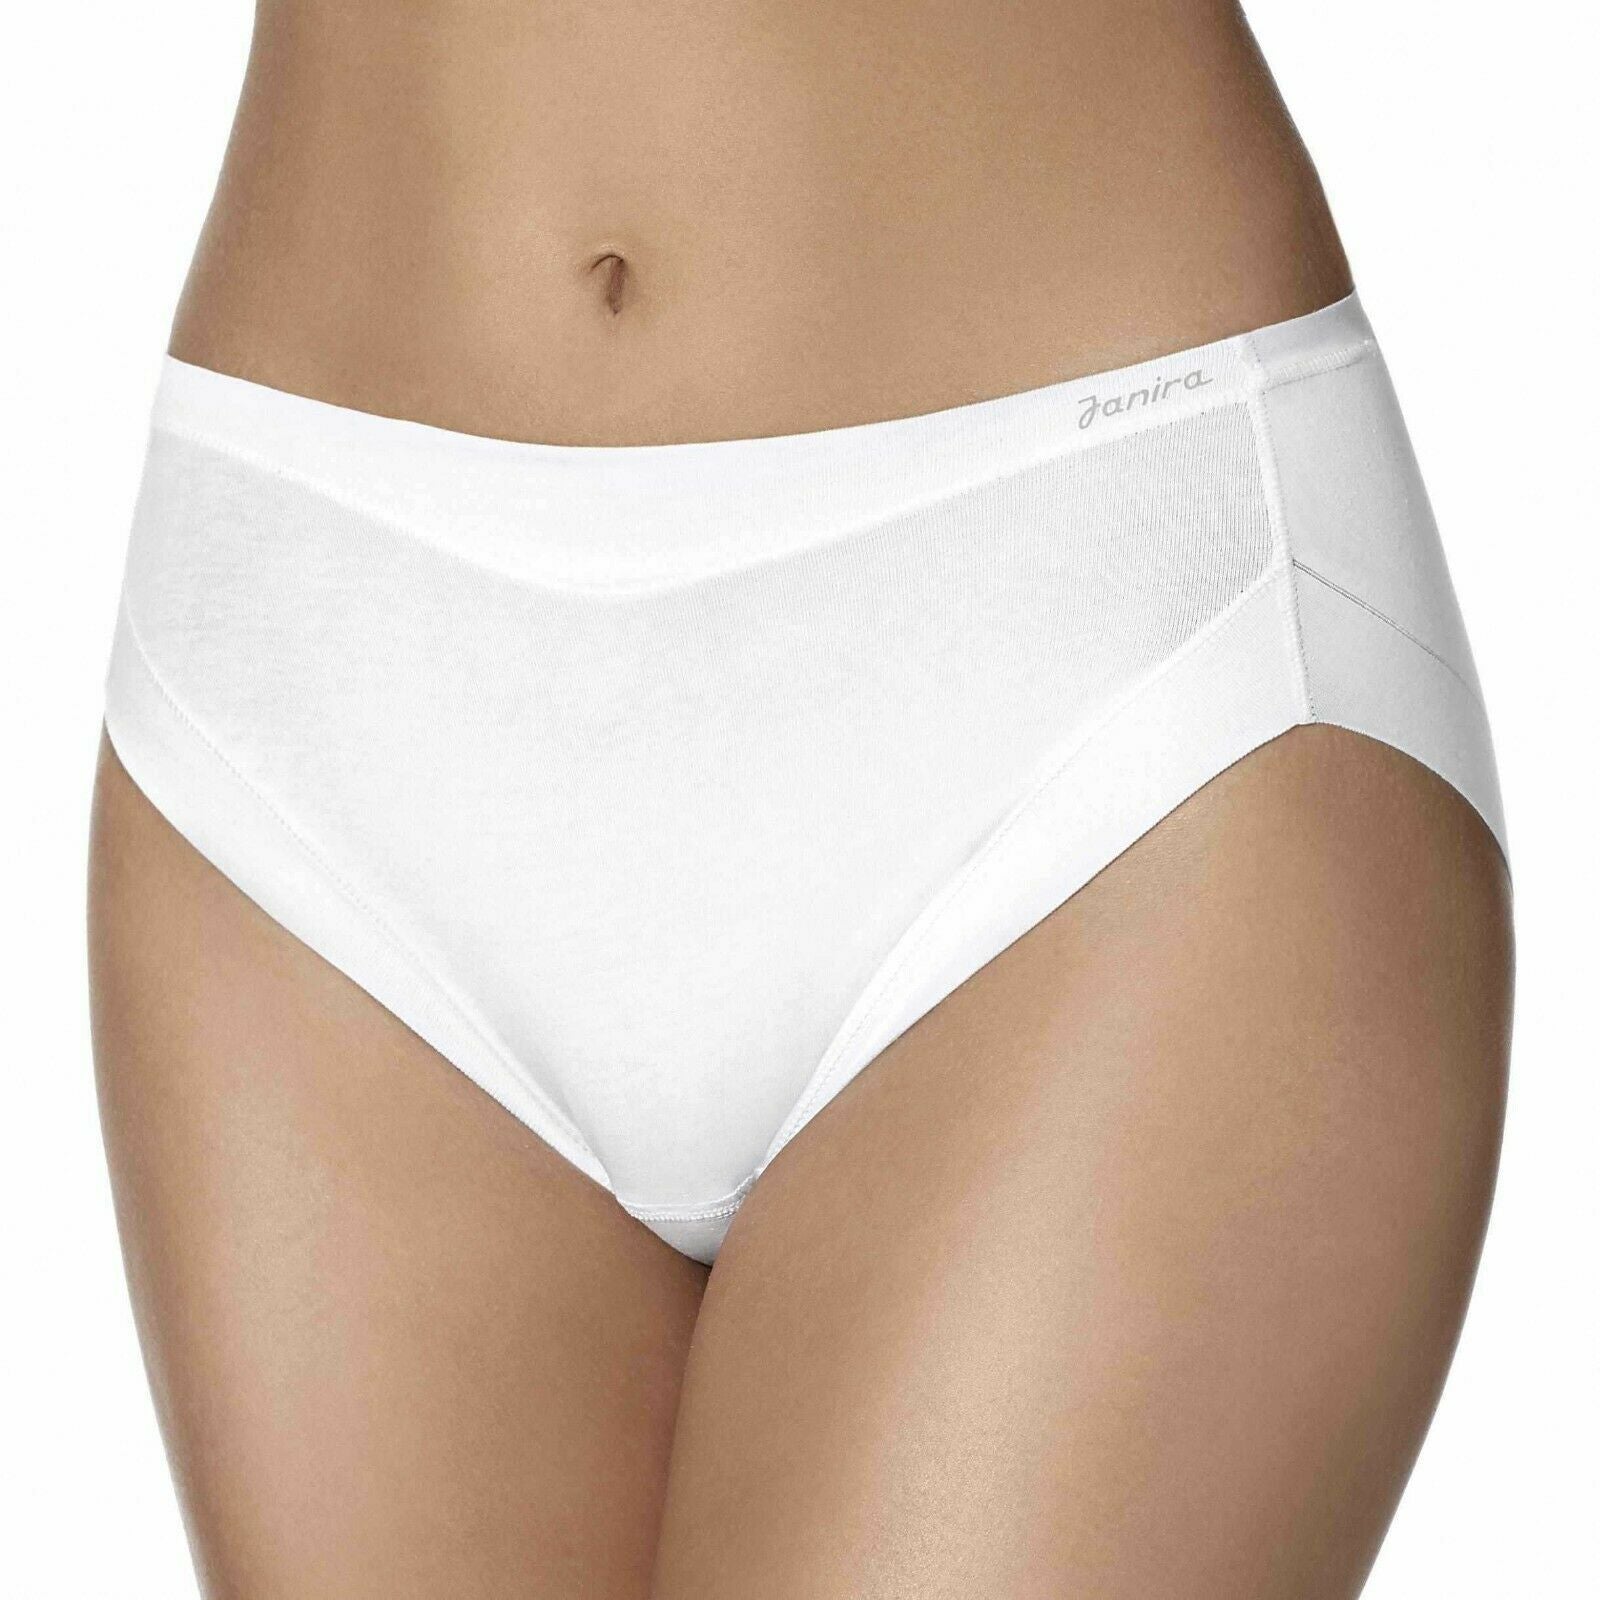 Janira Ladies Briefs - Active Day Shorty Style Knickers - Gym